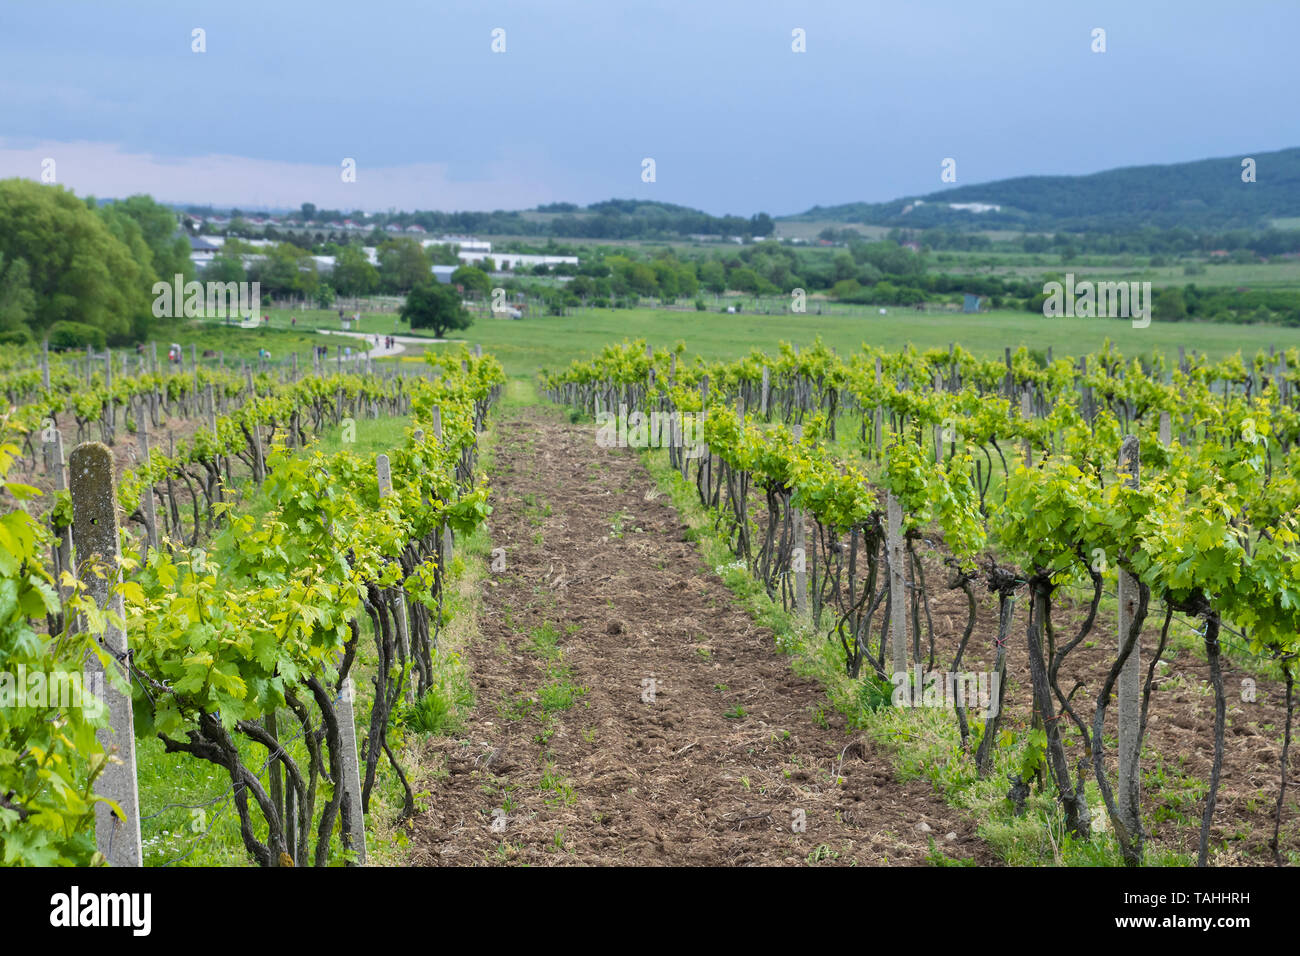 beautiful green landscape with vineyards Stock Photo